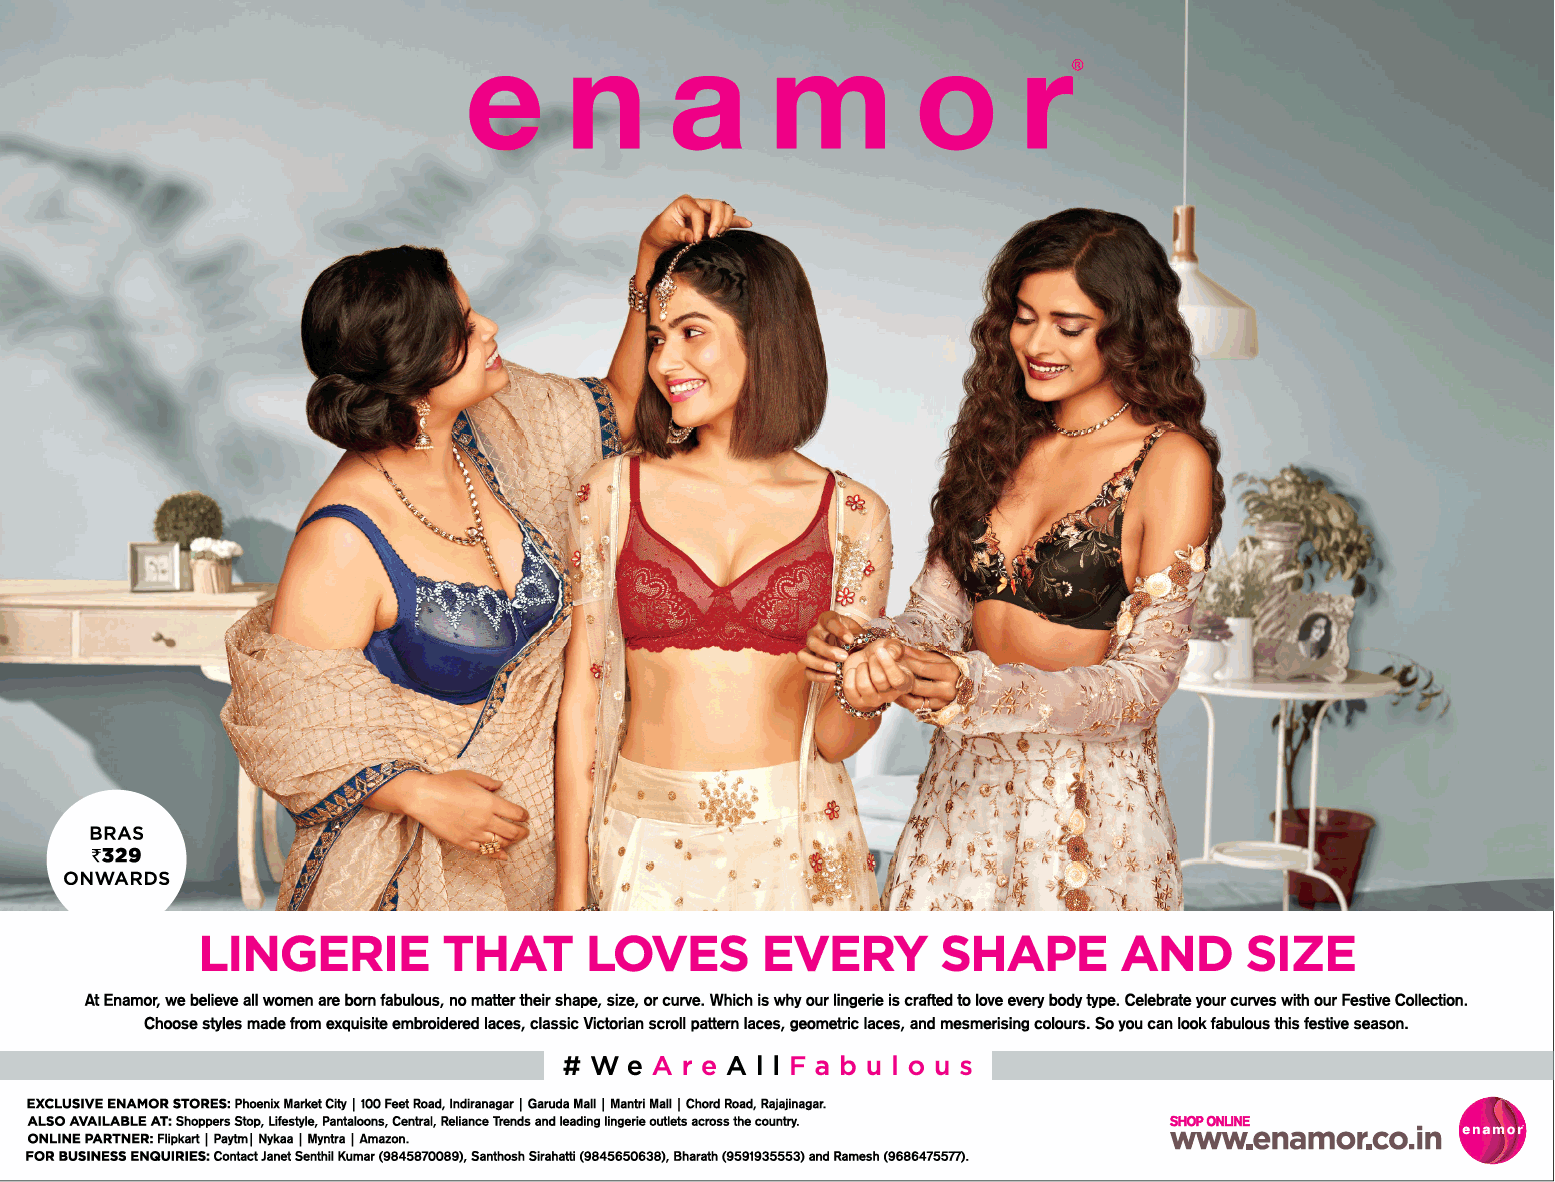 https://newspaperads.ads2publish.com/wp-content/uploads/2018/10/enamor-lingerie-that-loves-every-shape-and-size-ad-times-of-india-bangalore-05-10-2018.png